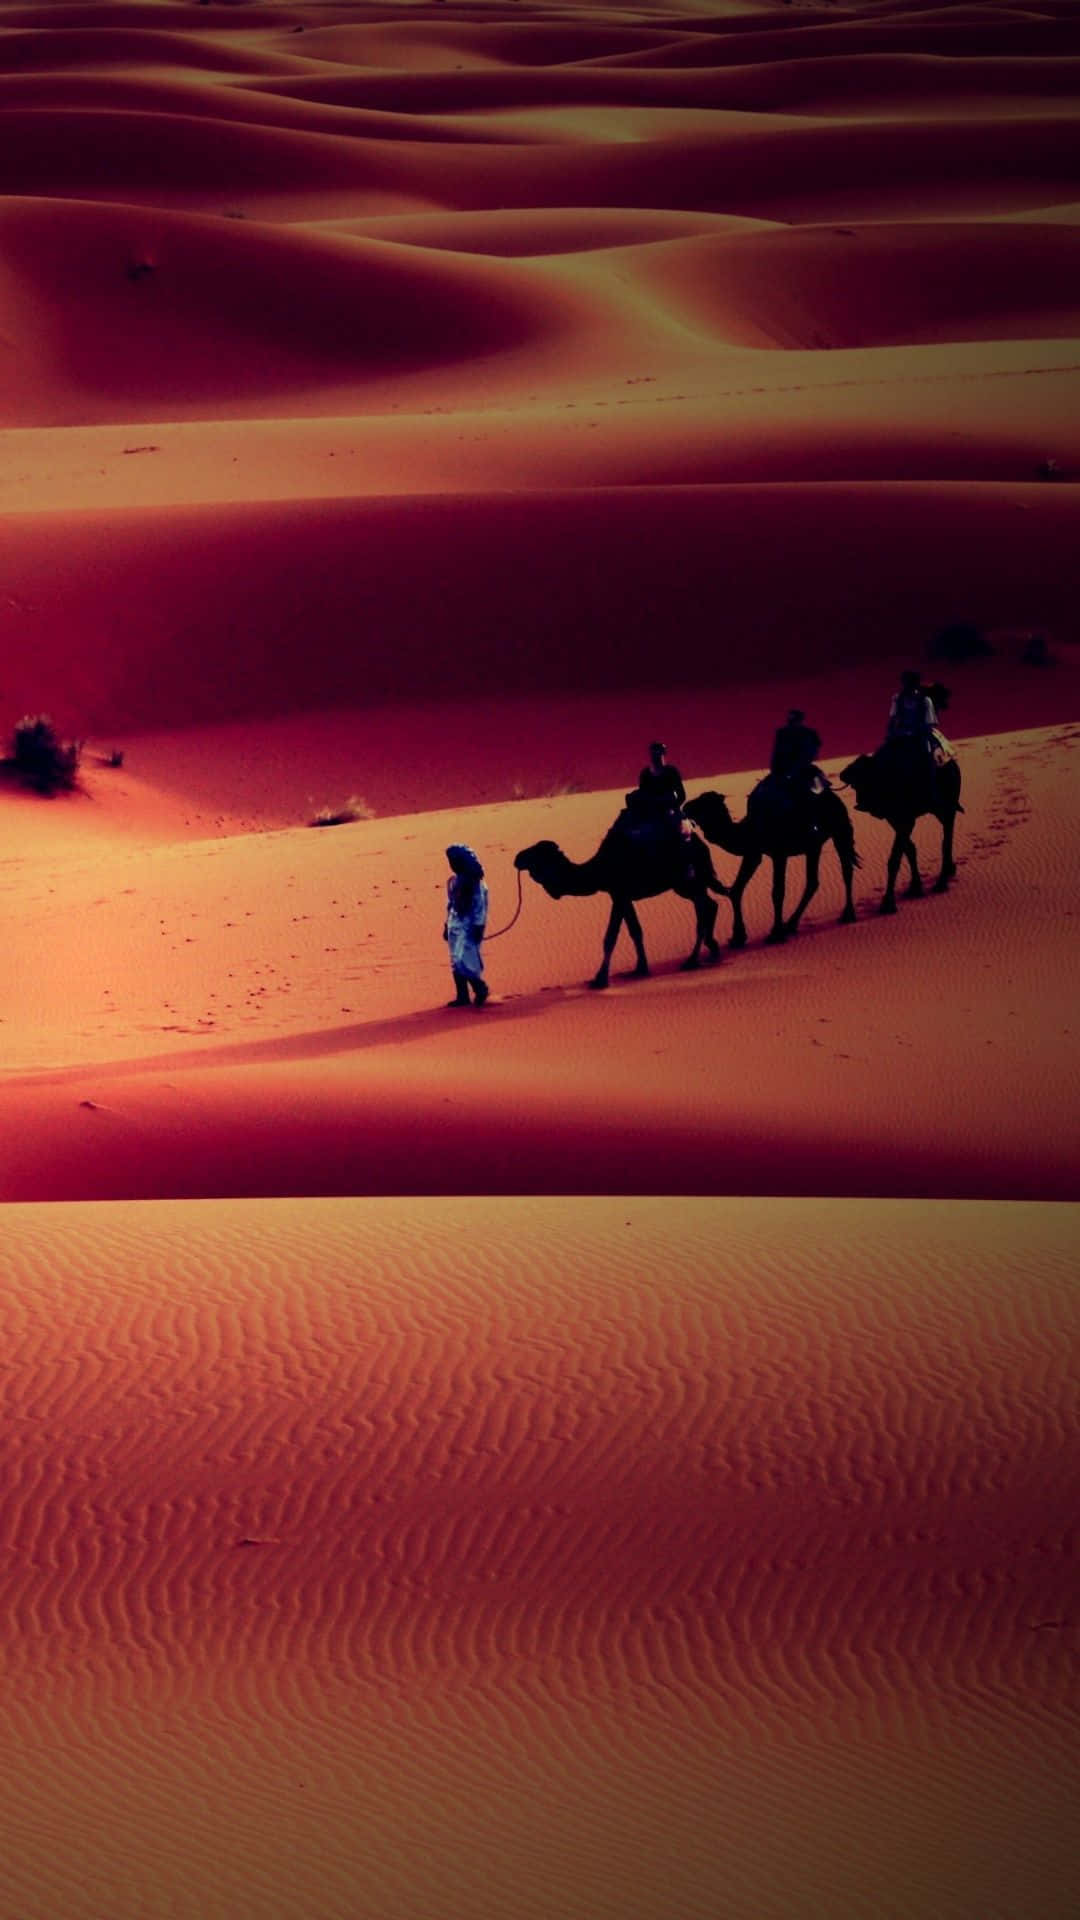 Man With Camels In A Desert Iphone Wallpaper